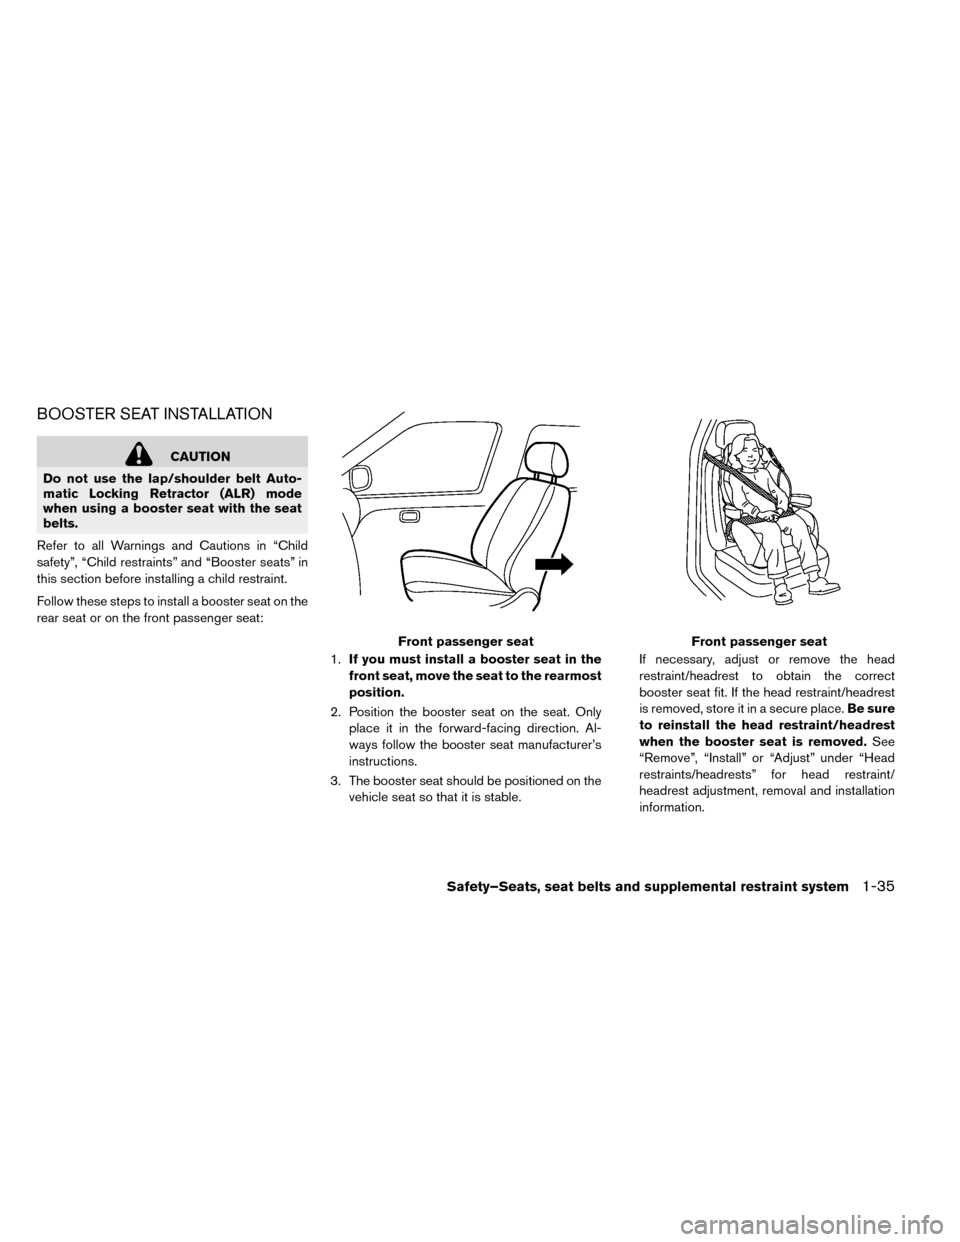 NISSAN LEAF 2015 1.G User Guide BOOSTER SEAT INSTALLATION
CAUTION
Do not use the lap/shoulder belt Auto-
matic Locking Retractor (ALR) mode
when using a booster seat with the seat
belts.
Refer to all Warnings and Cautions in “Chil